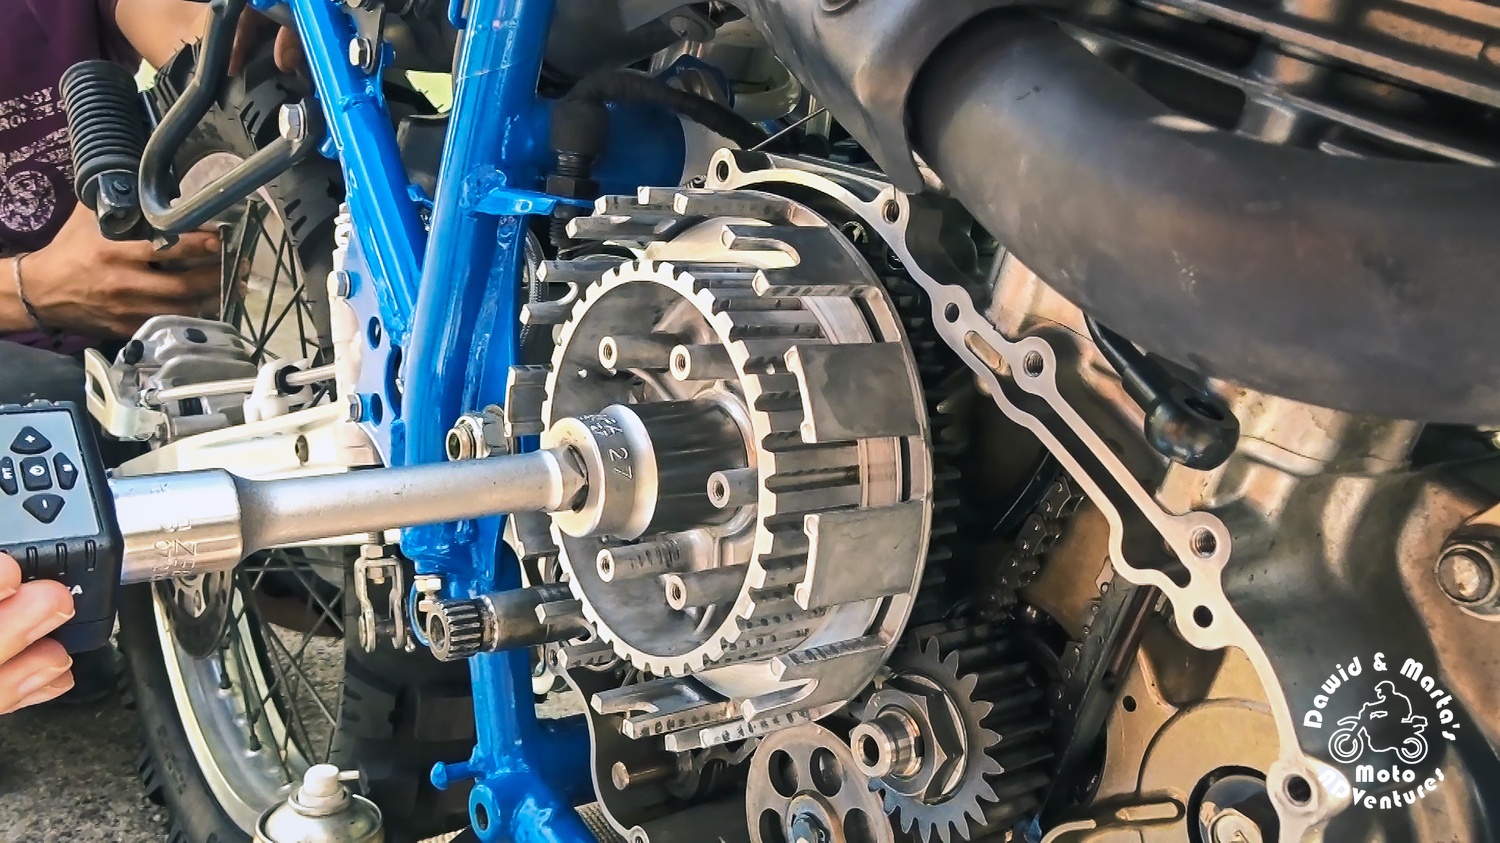 Tightening clutch basket and its inner hub nut, locking them on the shaft